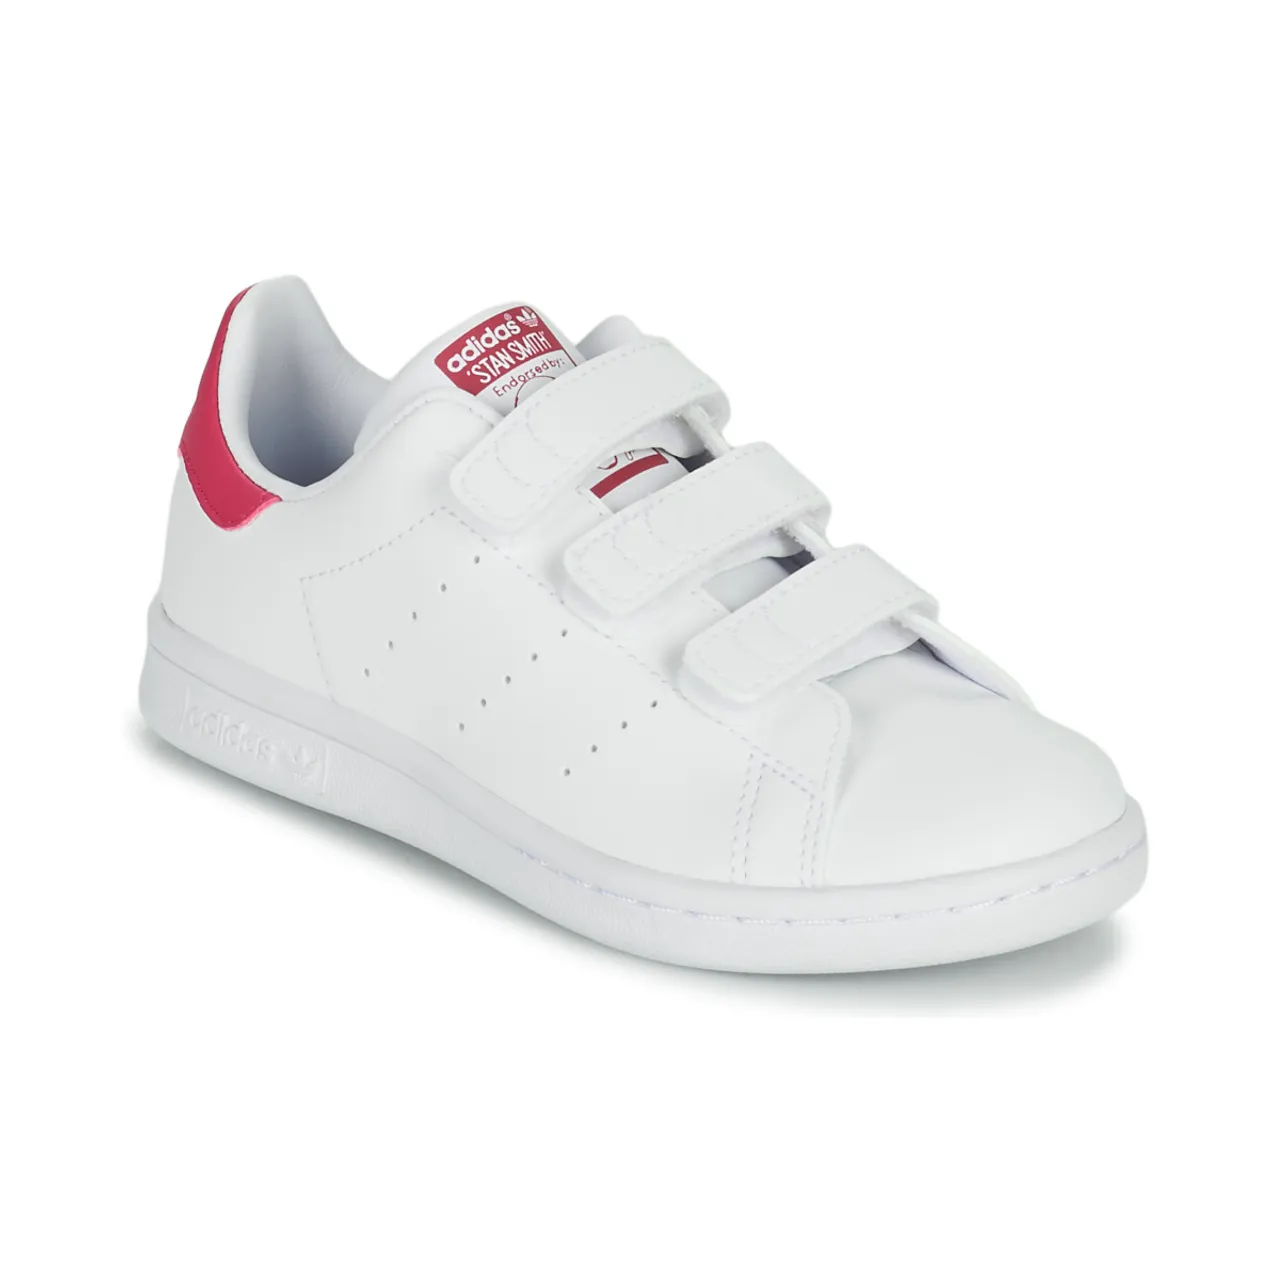 adidas  STAN SMITH CF C SUSTAINABLE  girls's Children's Shoes (Trainers) in White